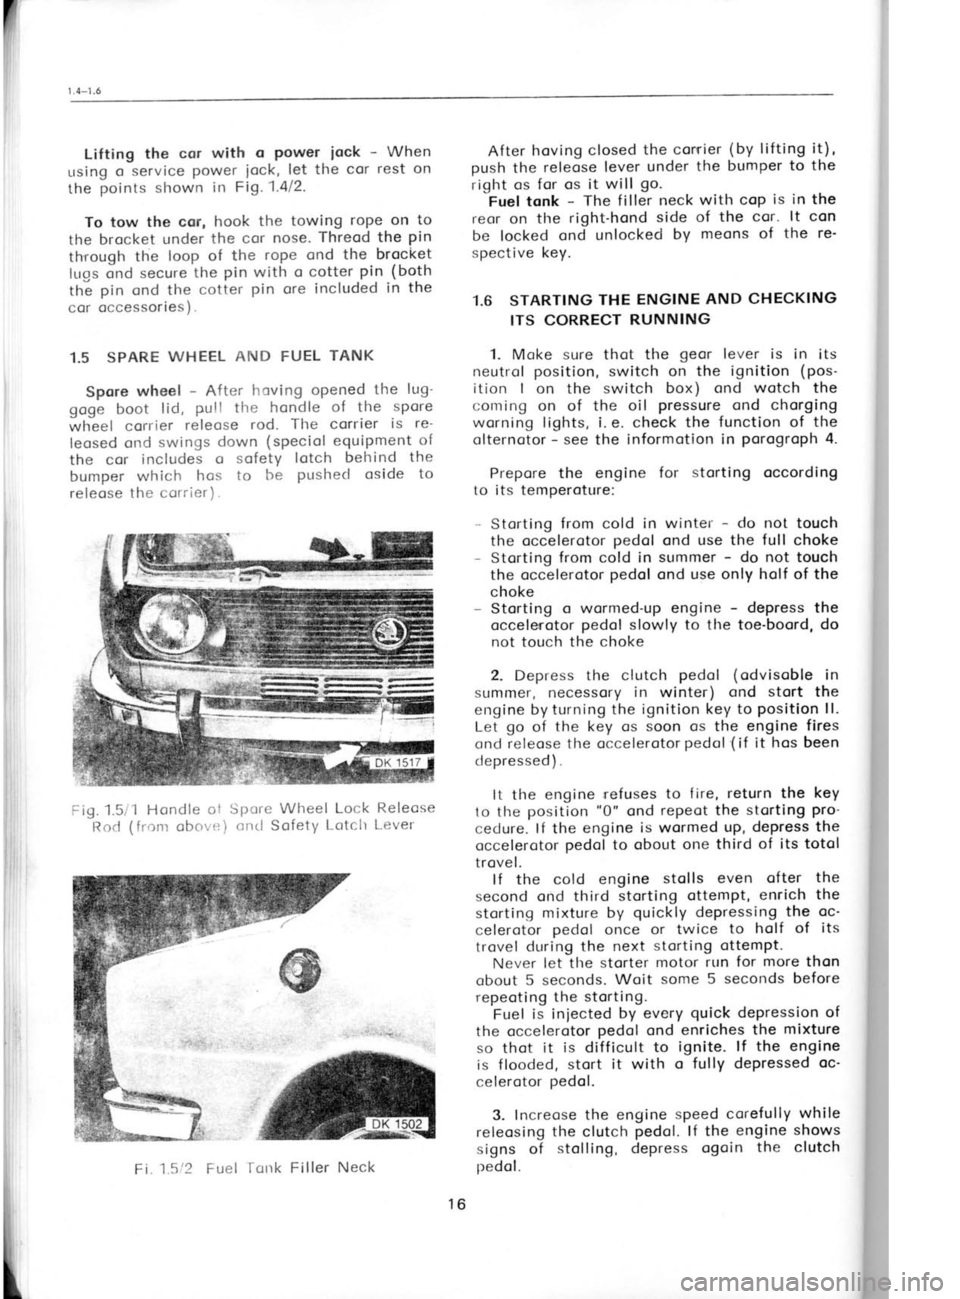 SKODA 120LE 1980  Workshop Manual Lifting 
the cor with  o 
Power  iock - 
When
r-rsing  o service 
Power iock, let the 
cor rest  on
the  points 
shown  in Fi1.1.412.
To tow  the  cor,  hook the  towing  rope on 
to
the brocket  unde